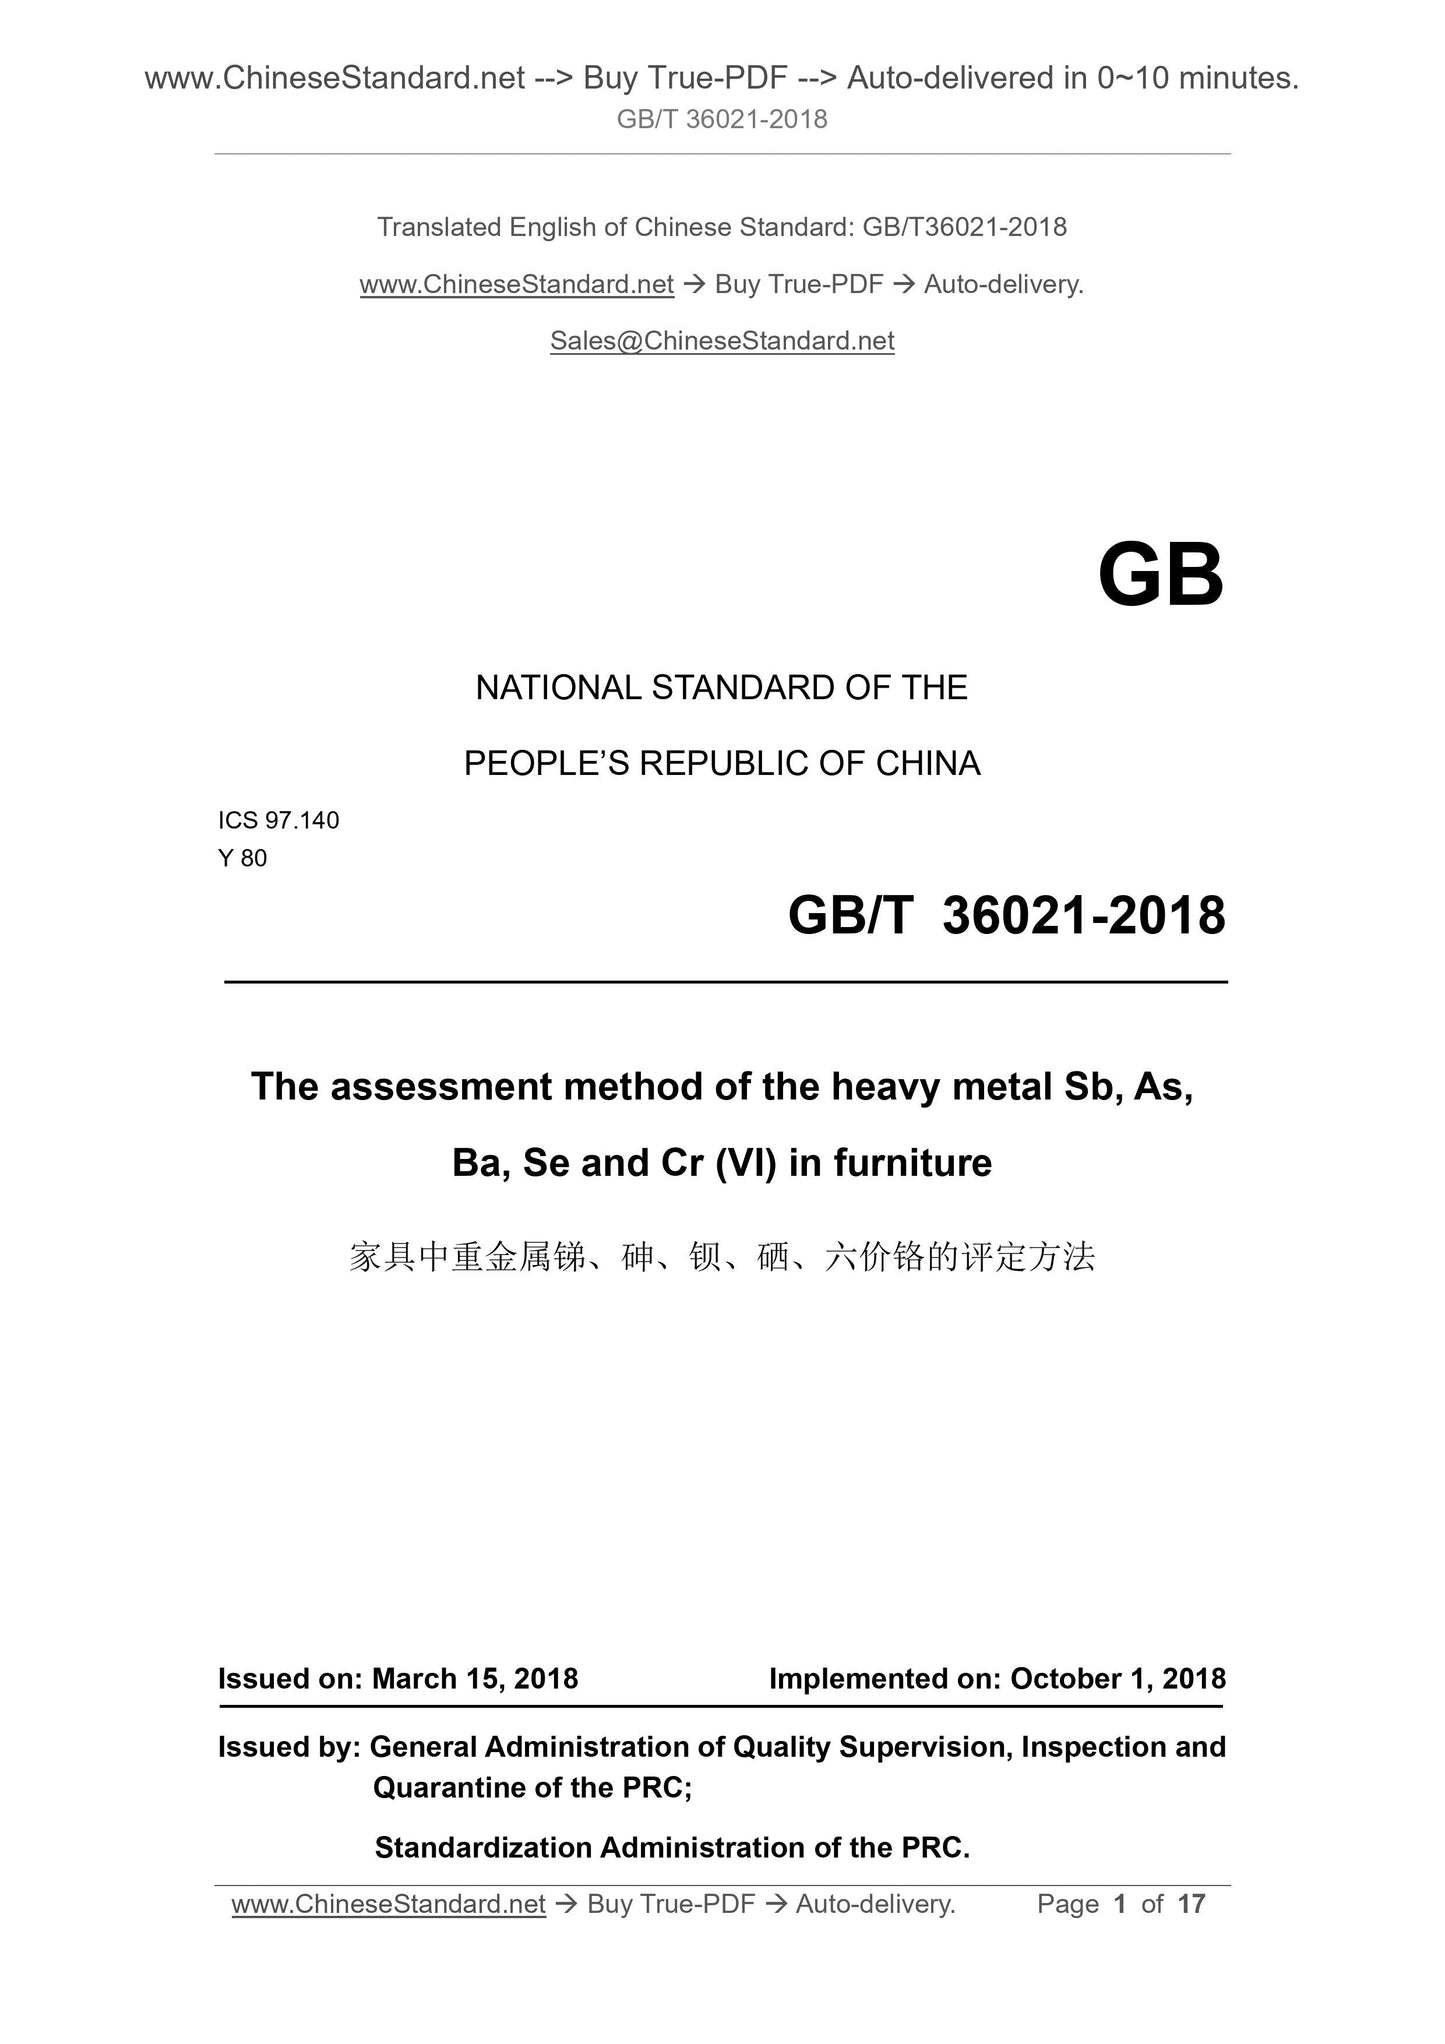 GB/T 36021-2018 Page 1